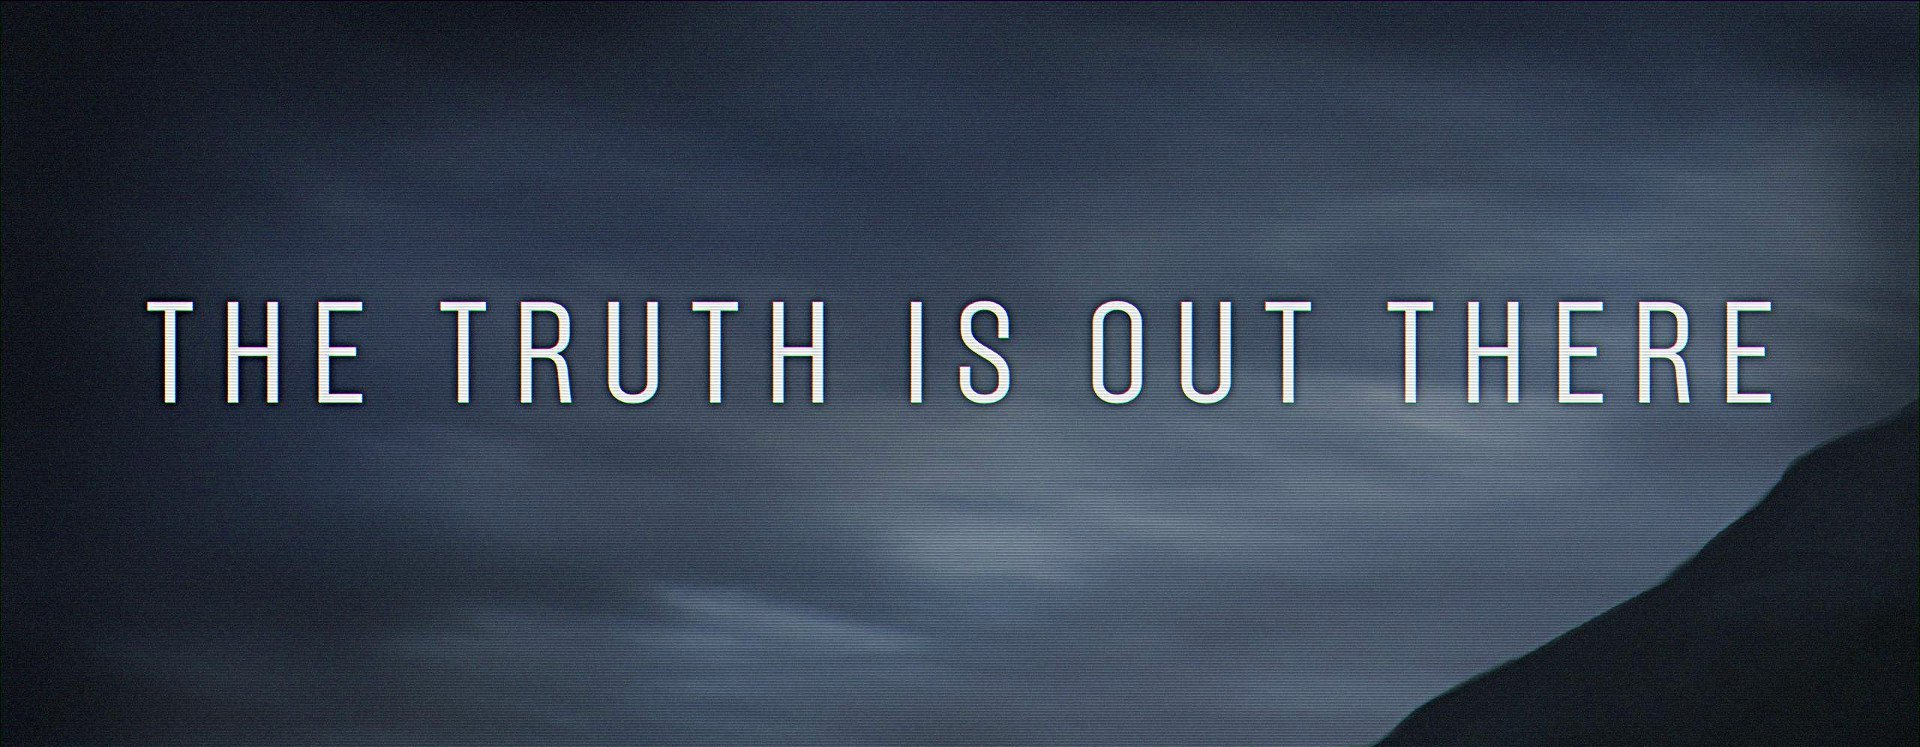 He s out there. Секретные материалы the Truth is out there. Истина где-то рядом секретные материалы. X files истина где-то рядом. The Truth is out there Постер.